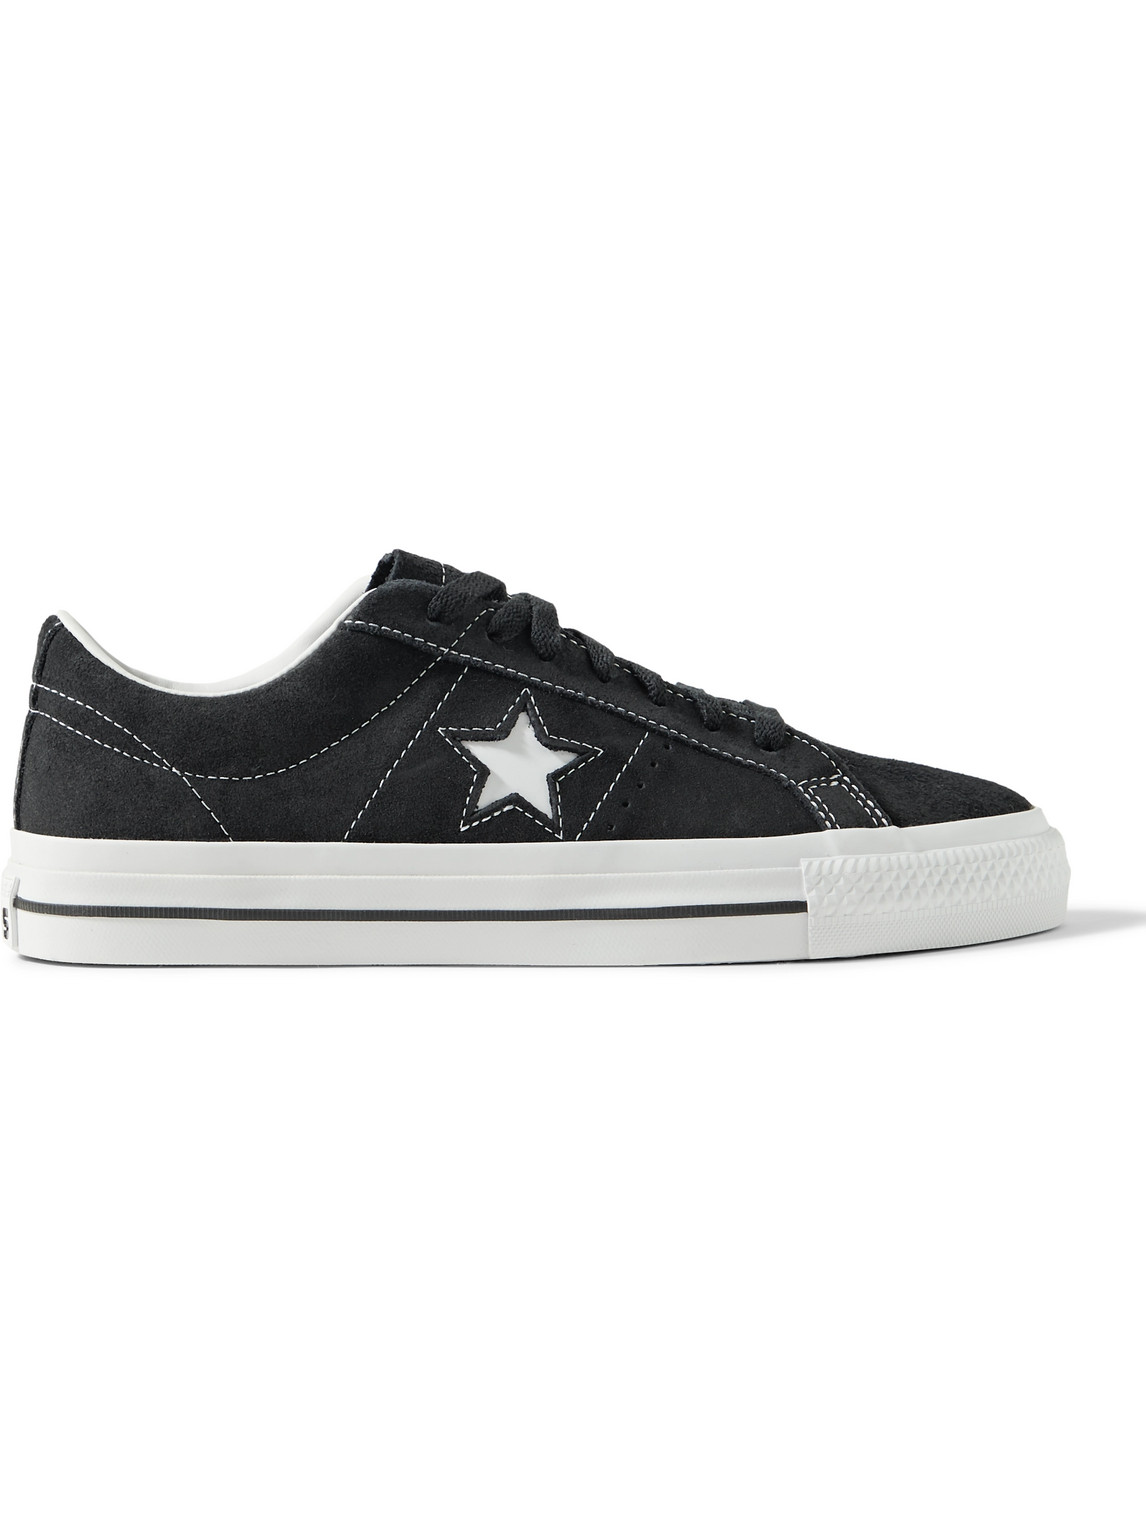 Shop Converse One Star Pro Leather-trimmed Suede Sneakers In Black